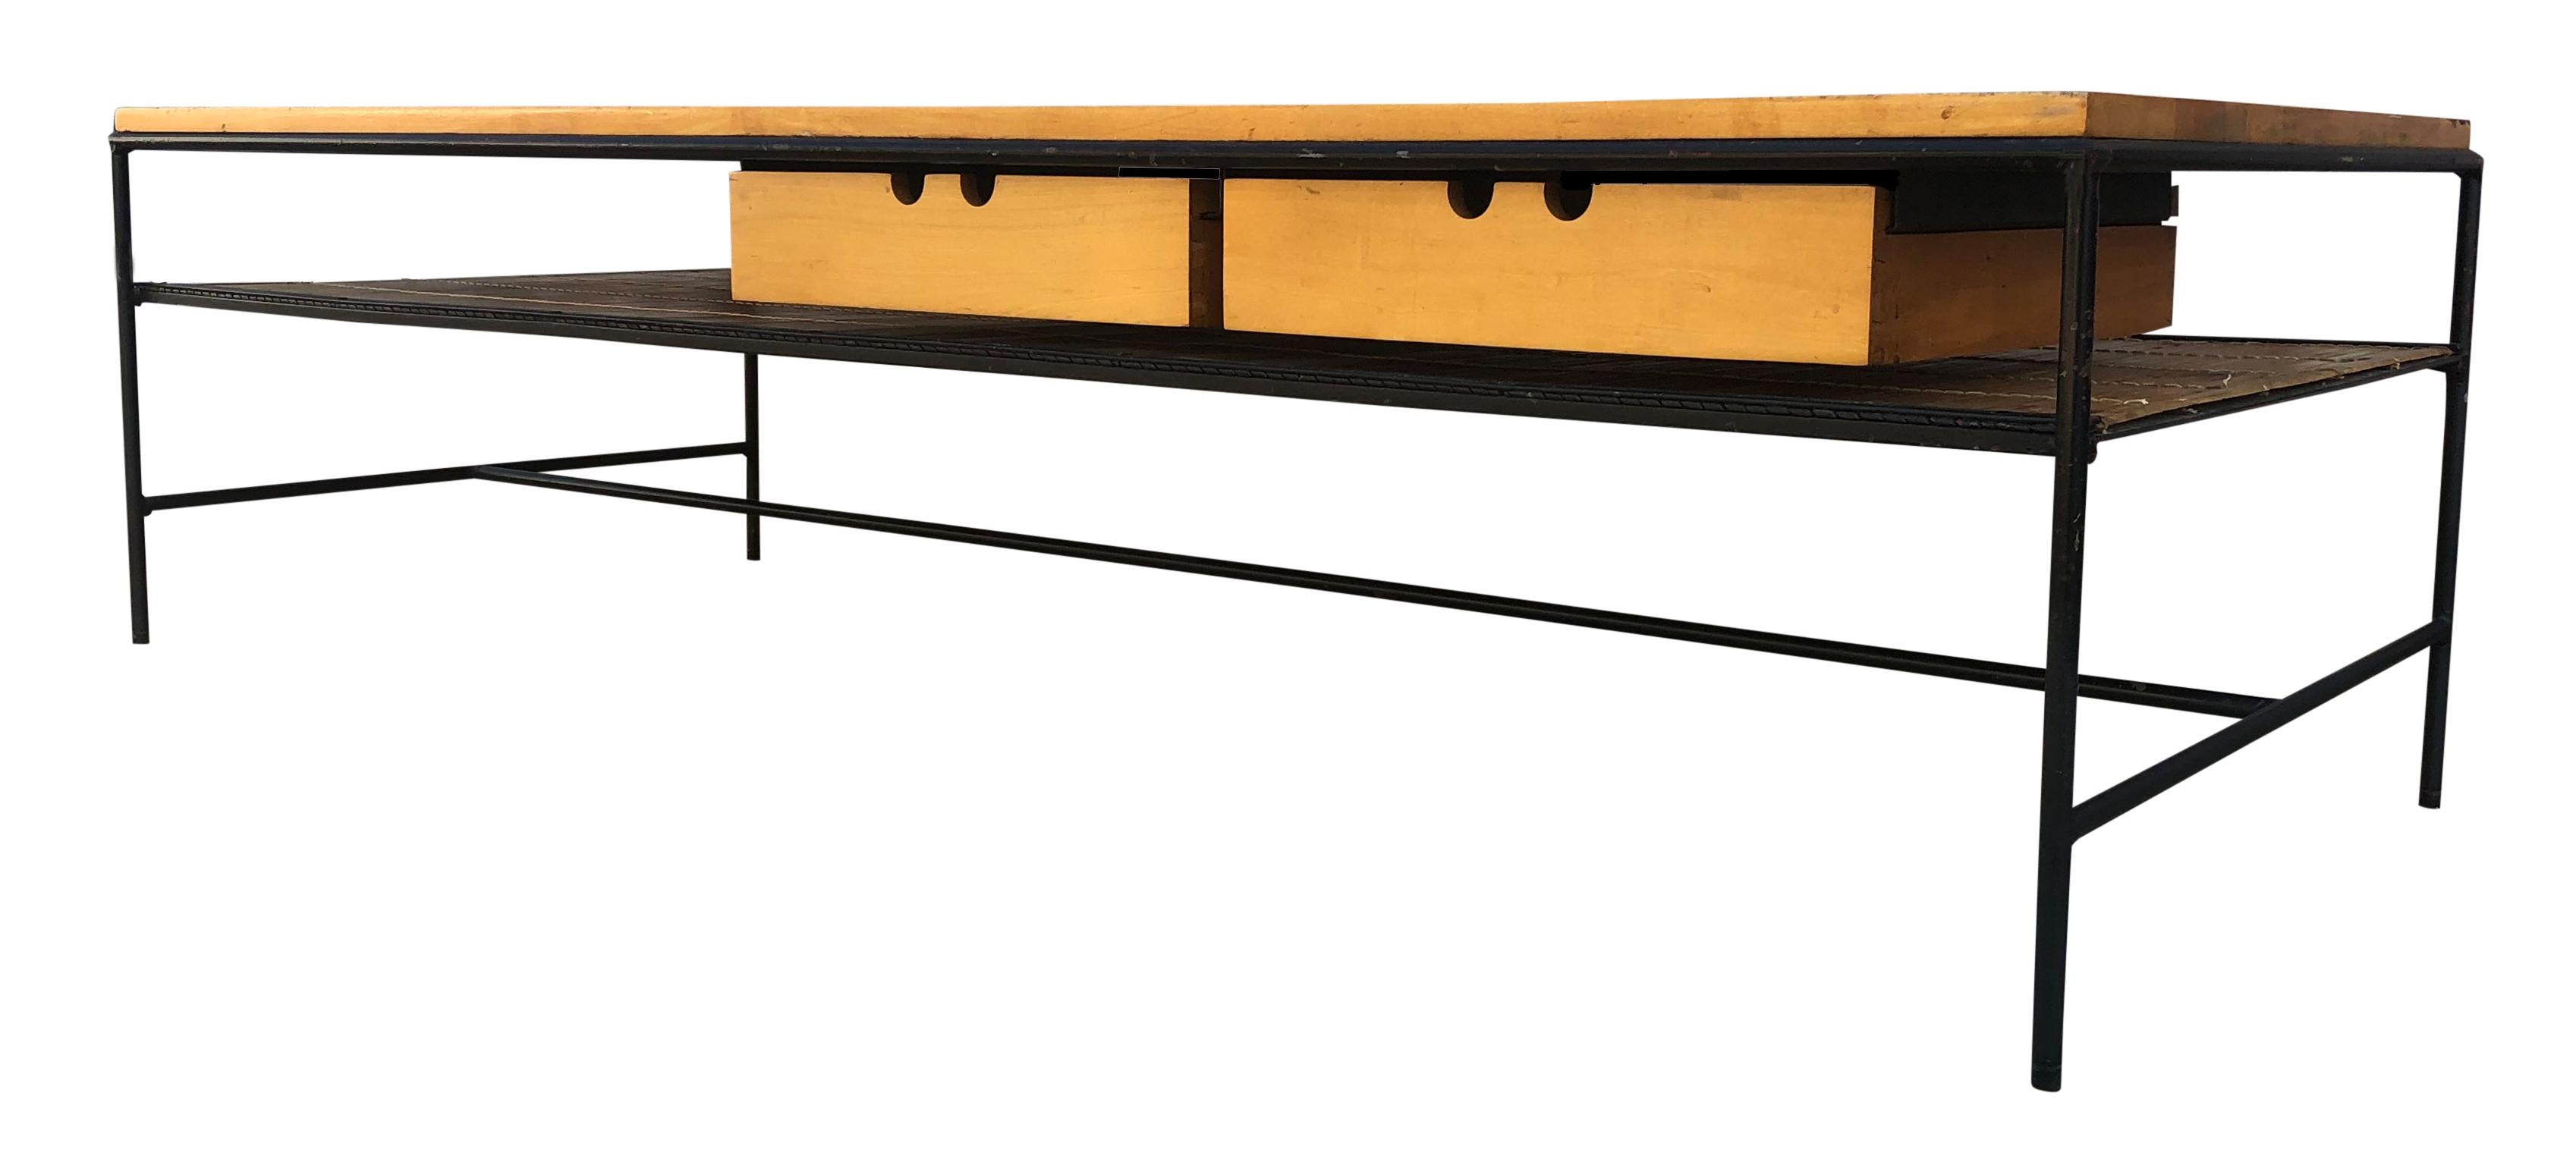 Beautiful Paul McCobb Planner Group #1584 solid maple 60 inch coffee table bench blonde maple finish, Minimalist Iron structure with 2 drawers all original raw blonde finish. Very delicate designed coffee table with iron legs has lower tied slat